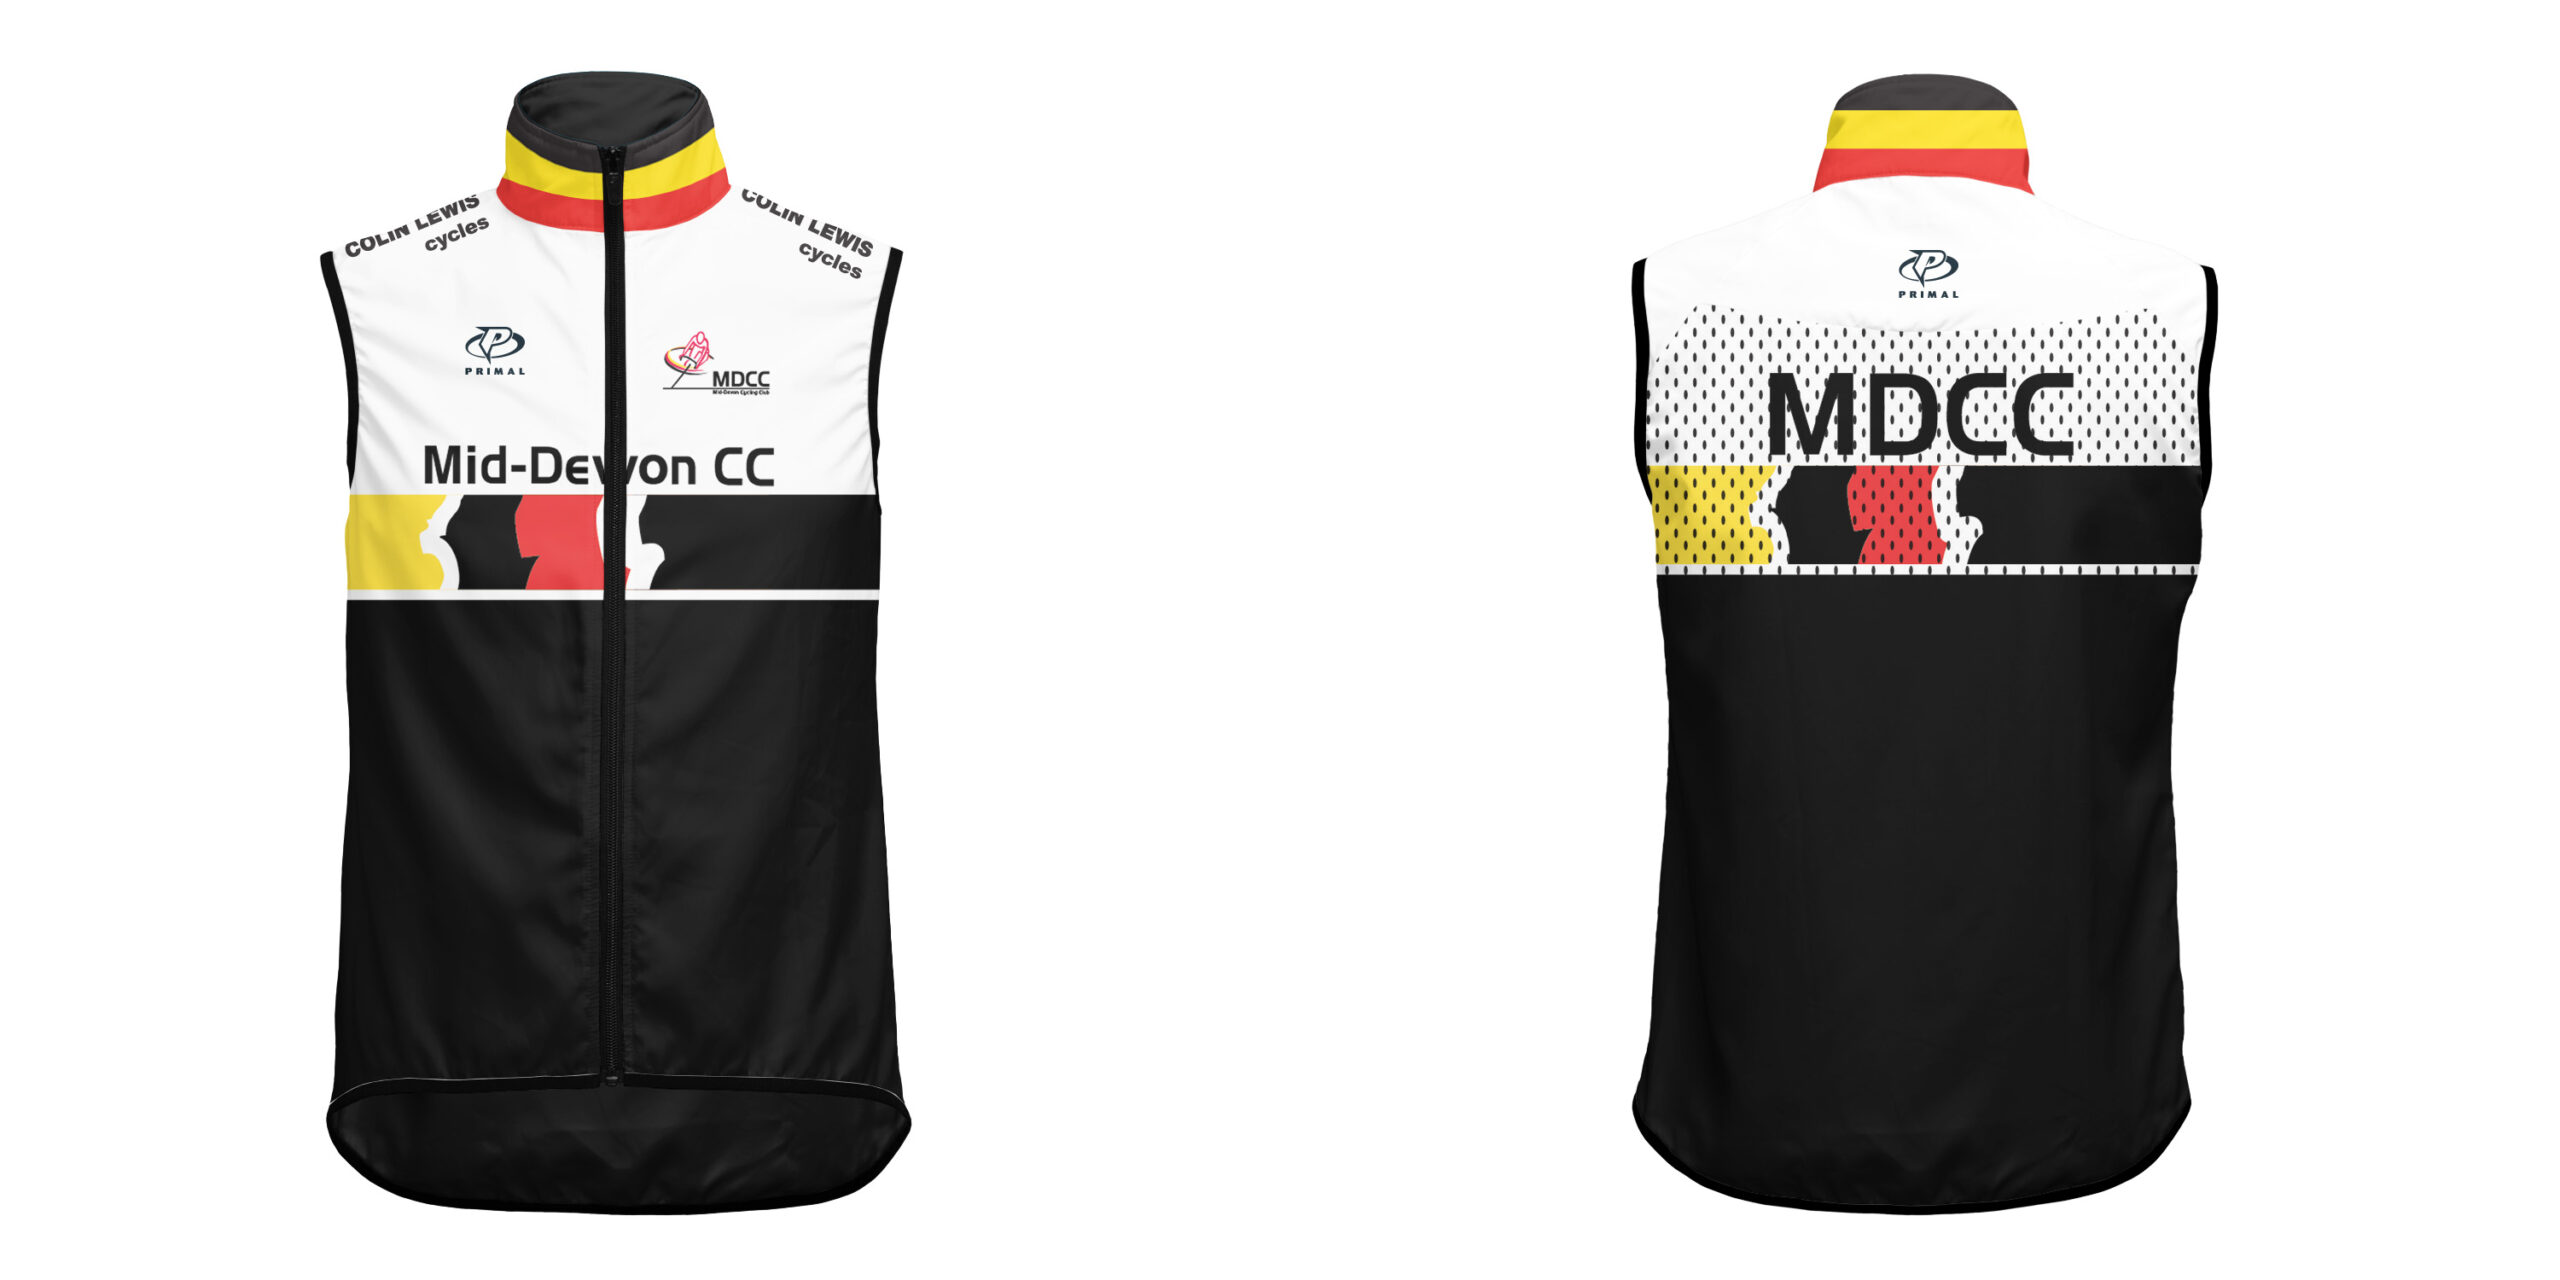 Club Kit – Jerseys/Gilets/Shoe Covers – Back in Stock from 1st August